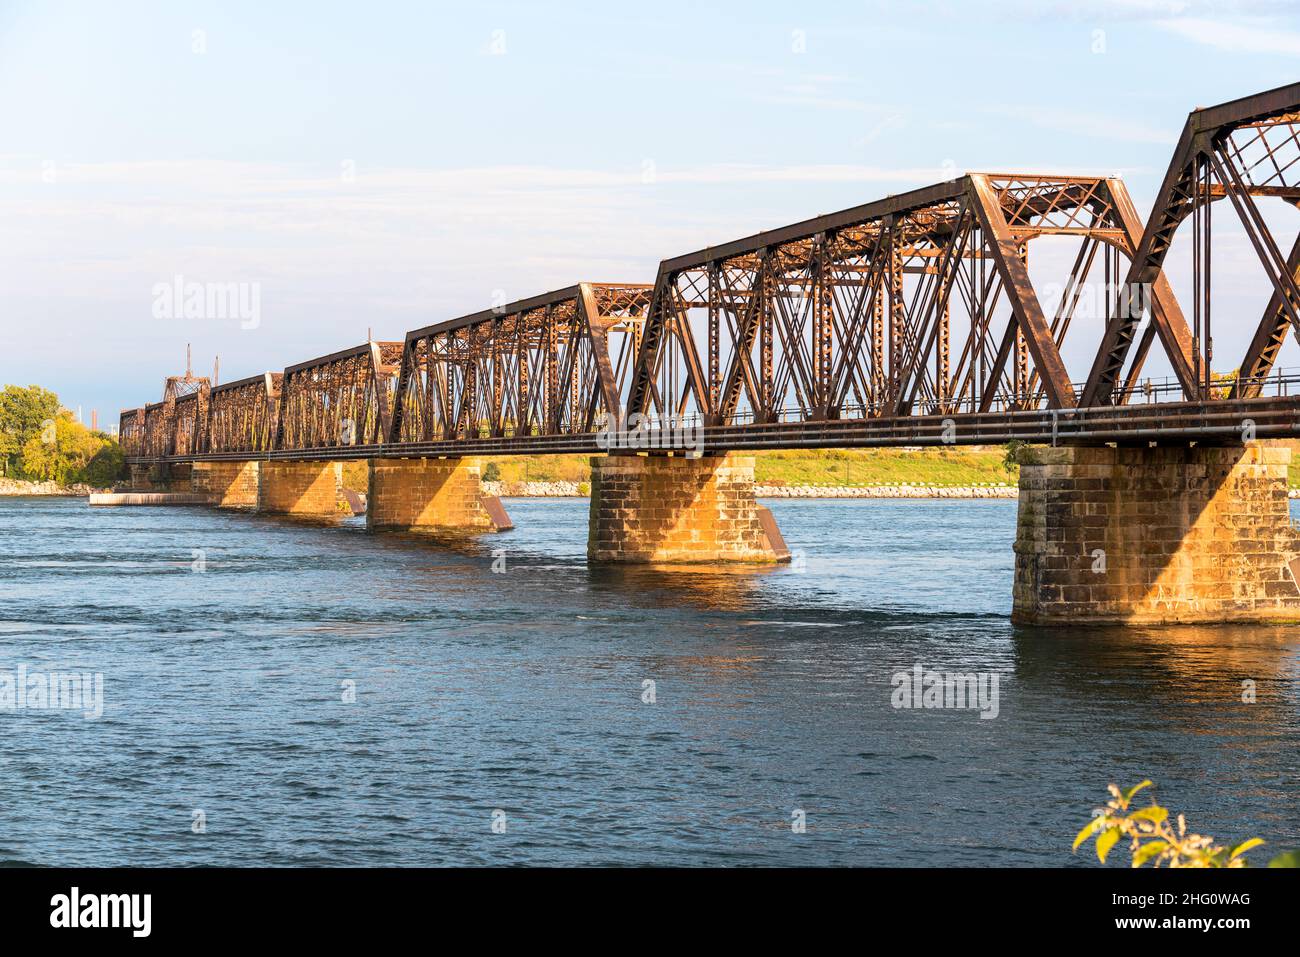 Old Steel railroad bridge spanning a river on a sunny autumn day Stock Photo